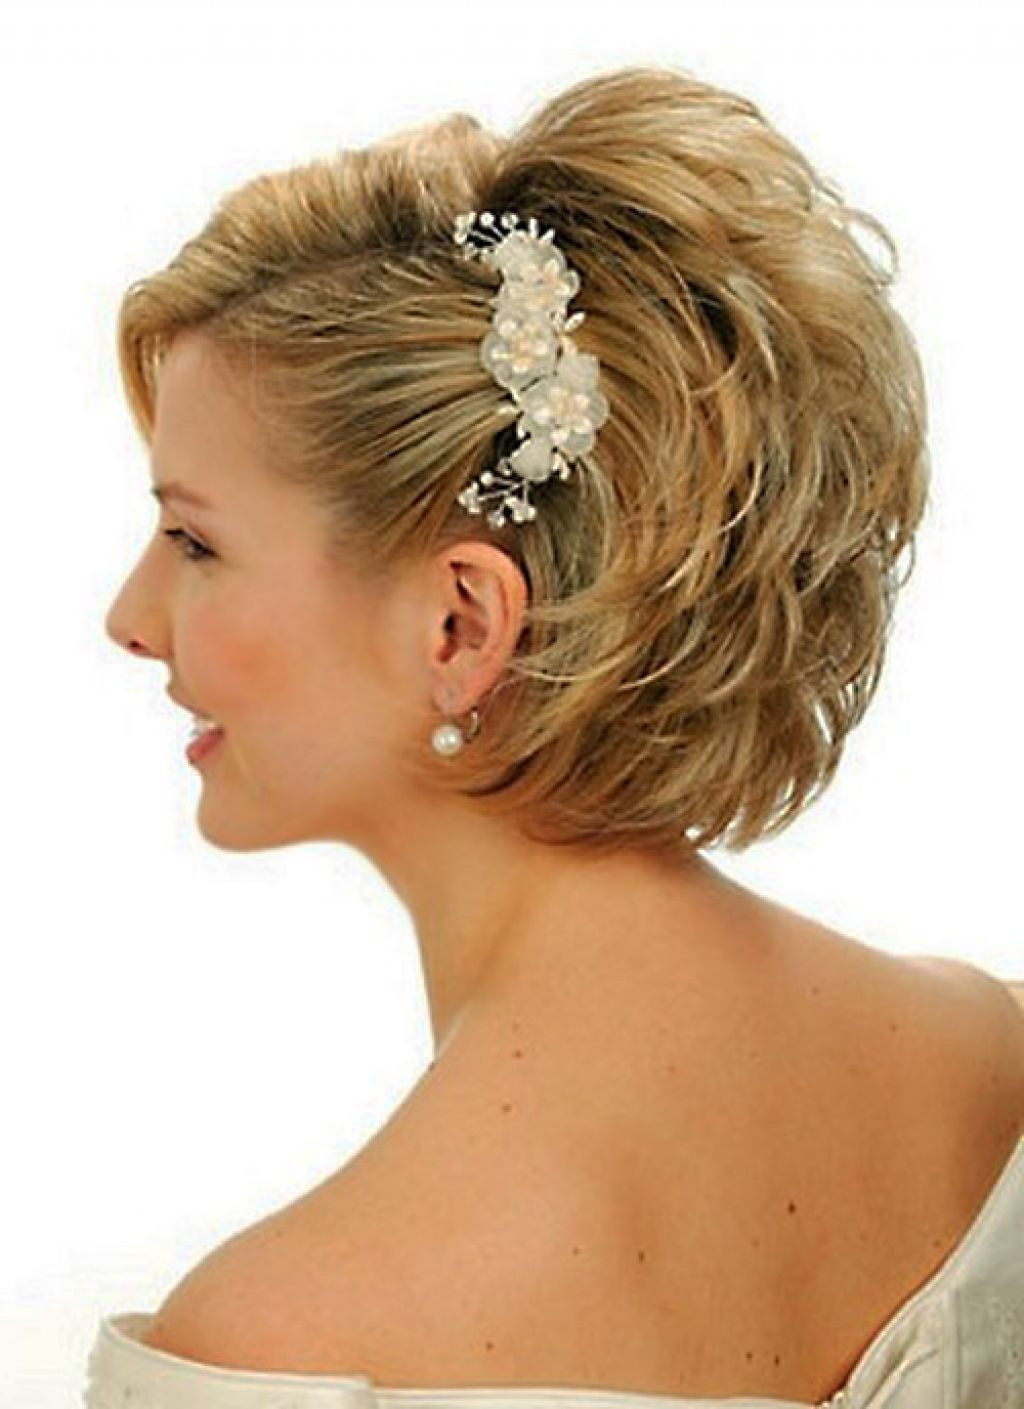 Hairstyles For Short Hair Wedding
 25 Most Favorite Wedding Hairstyles for Short Hair The